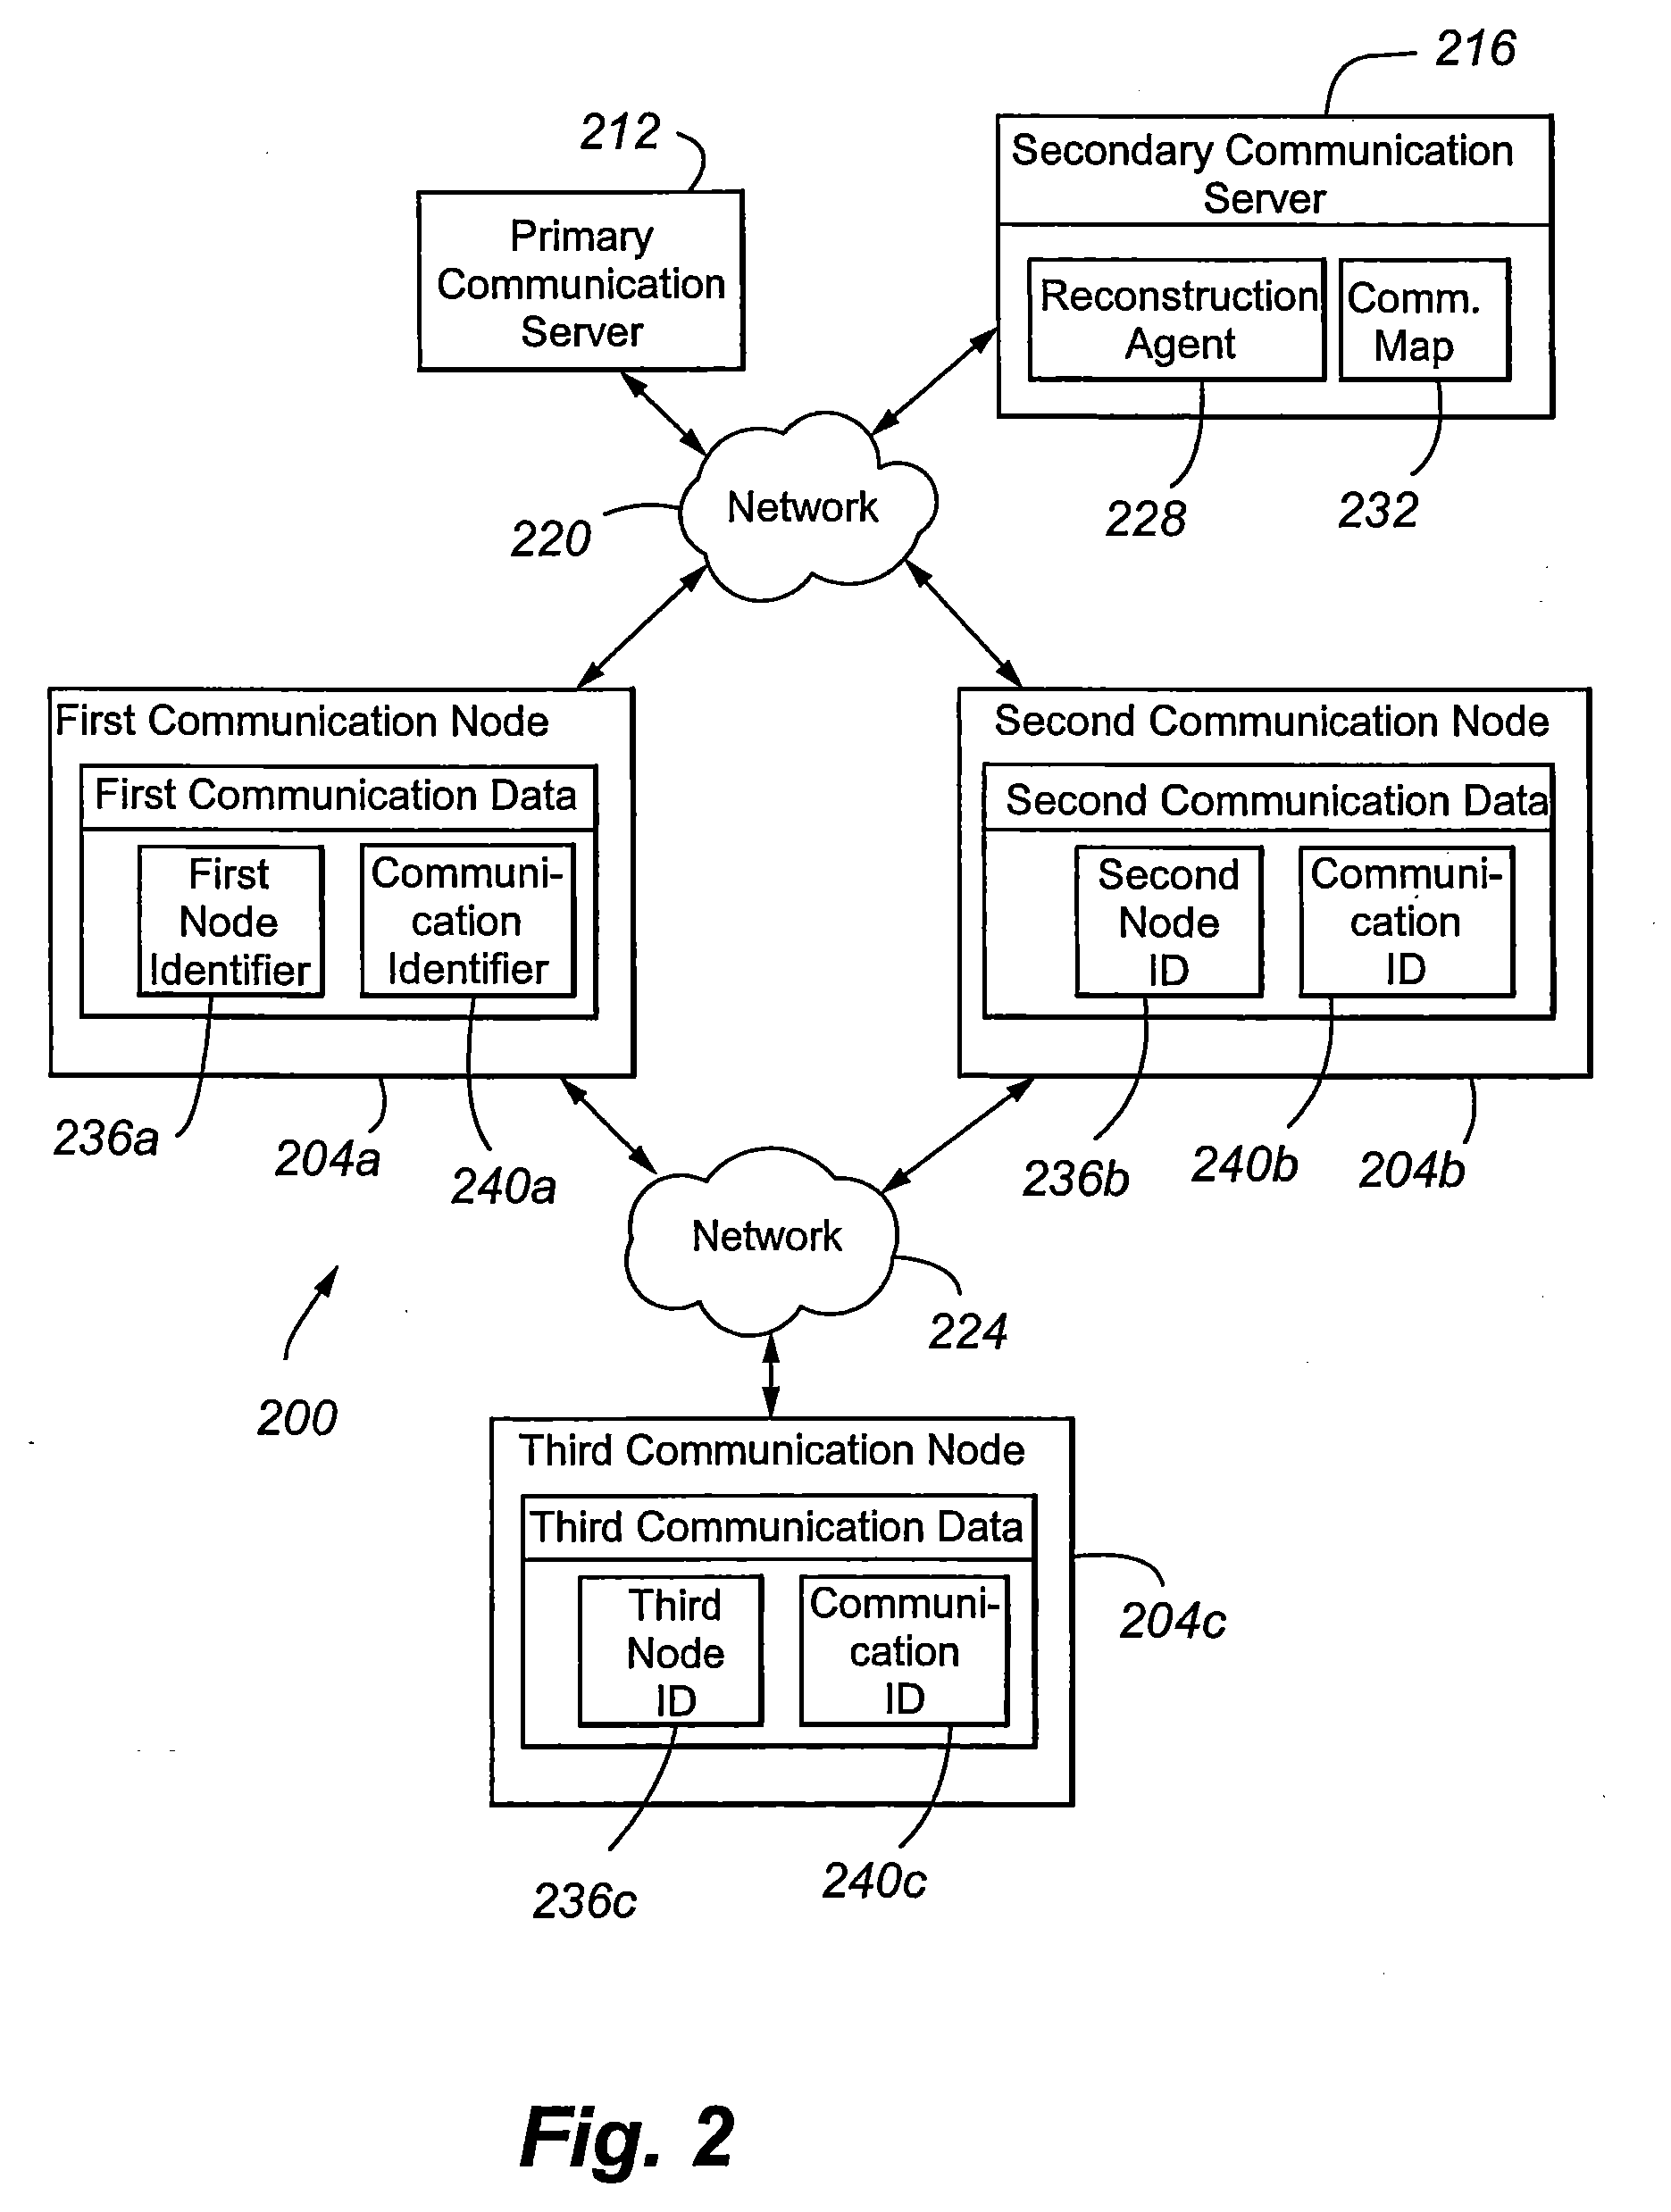 Method and apparatus for merging call components during call reconstruction